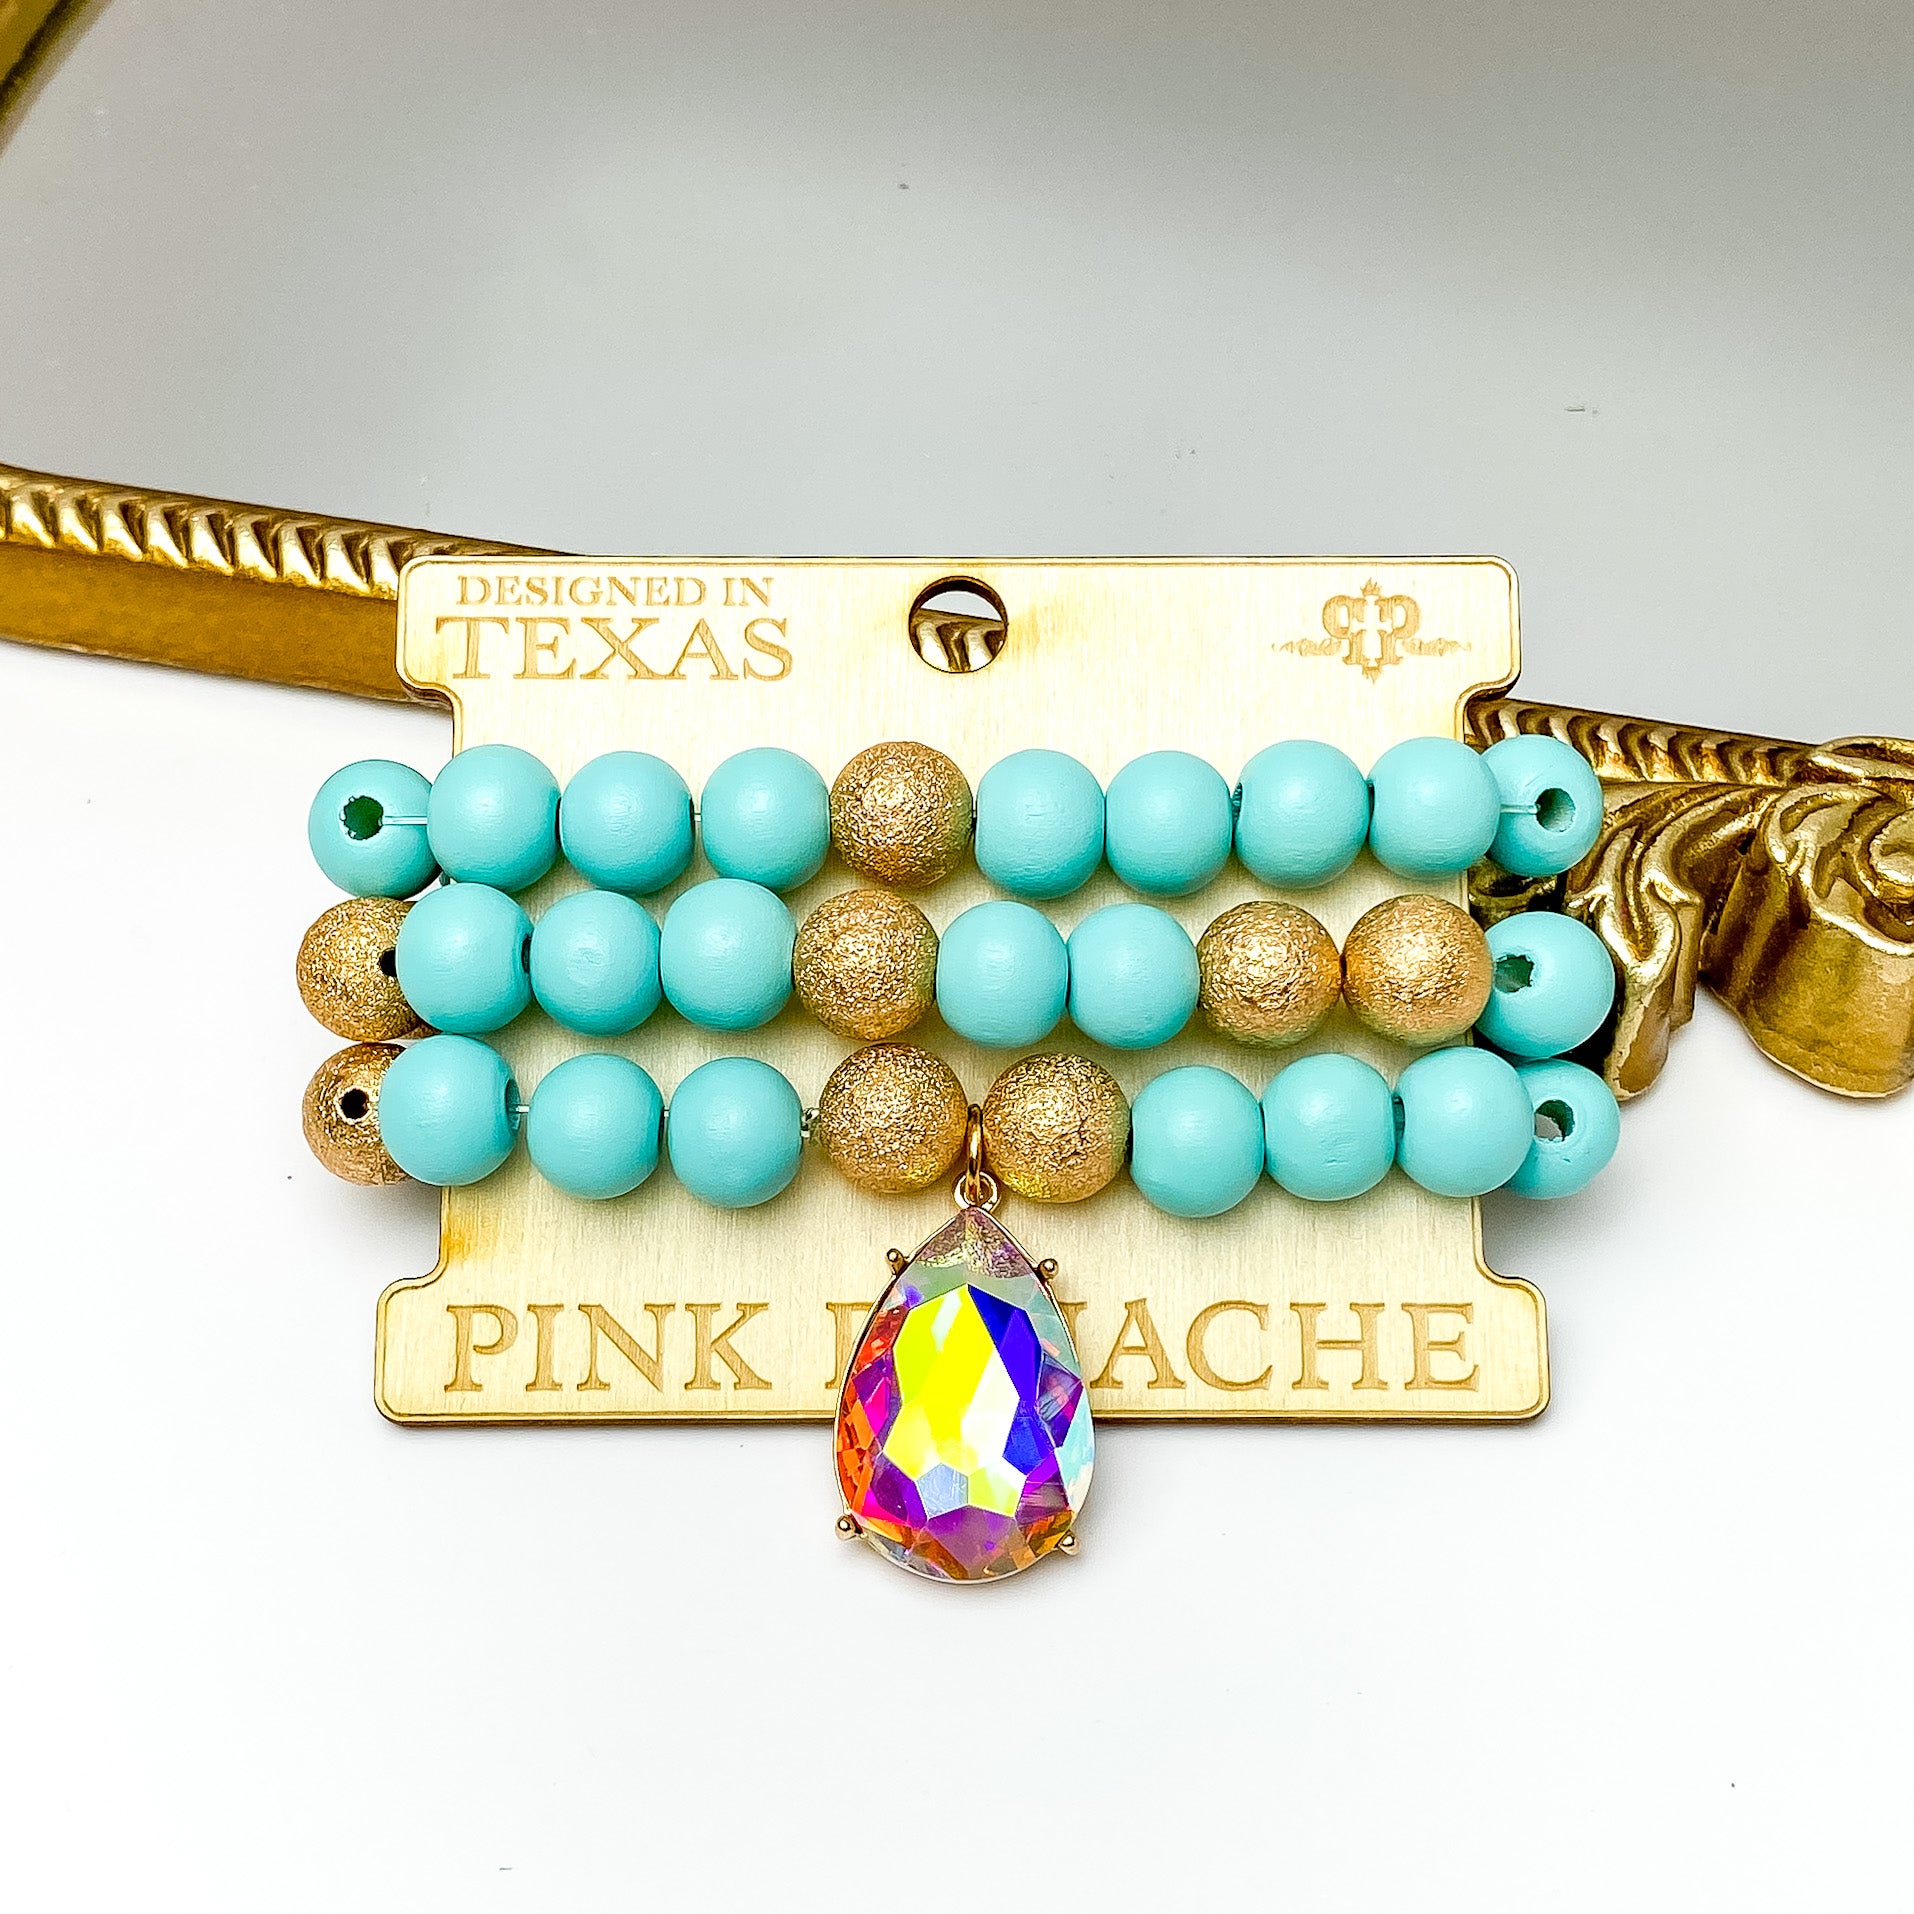 Pink Panache | Turquoise and Gold Tone Beaded Bracelet Set with Large AB Crystal Teardrop - Giddy Up Glamour Boutique